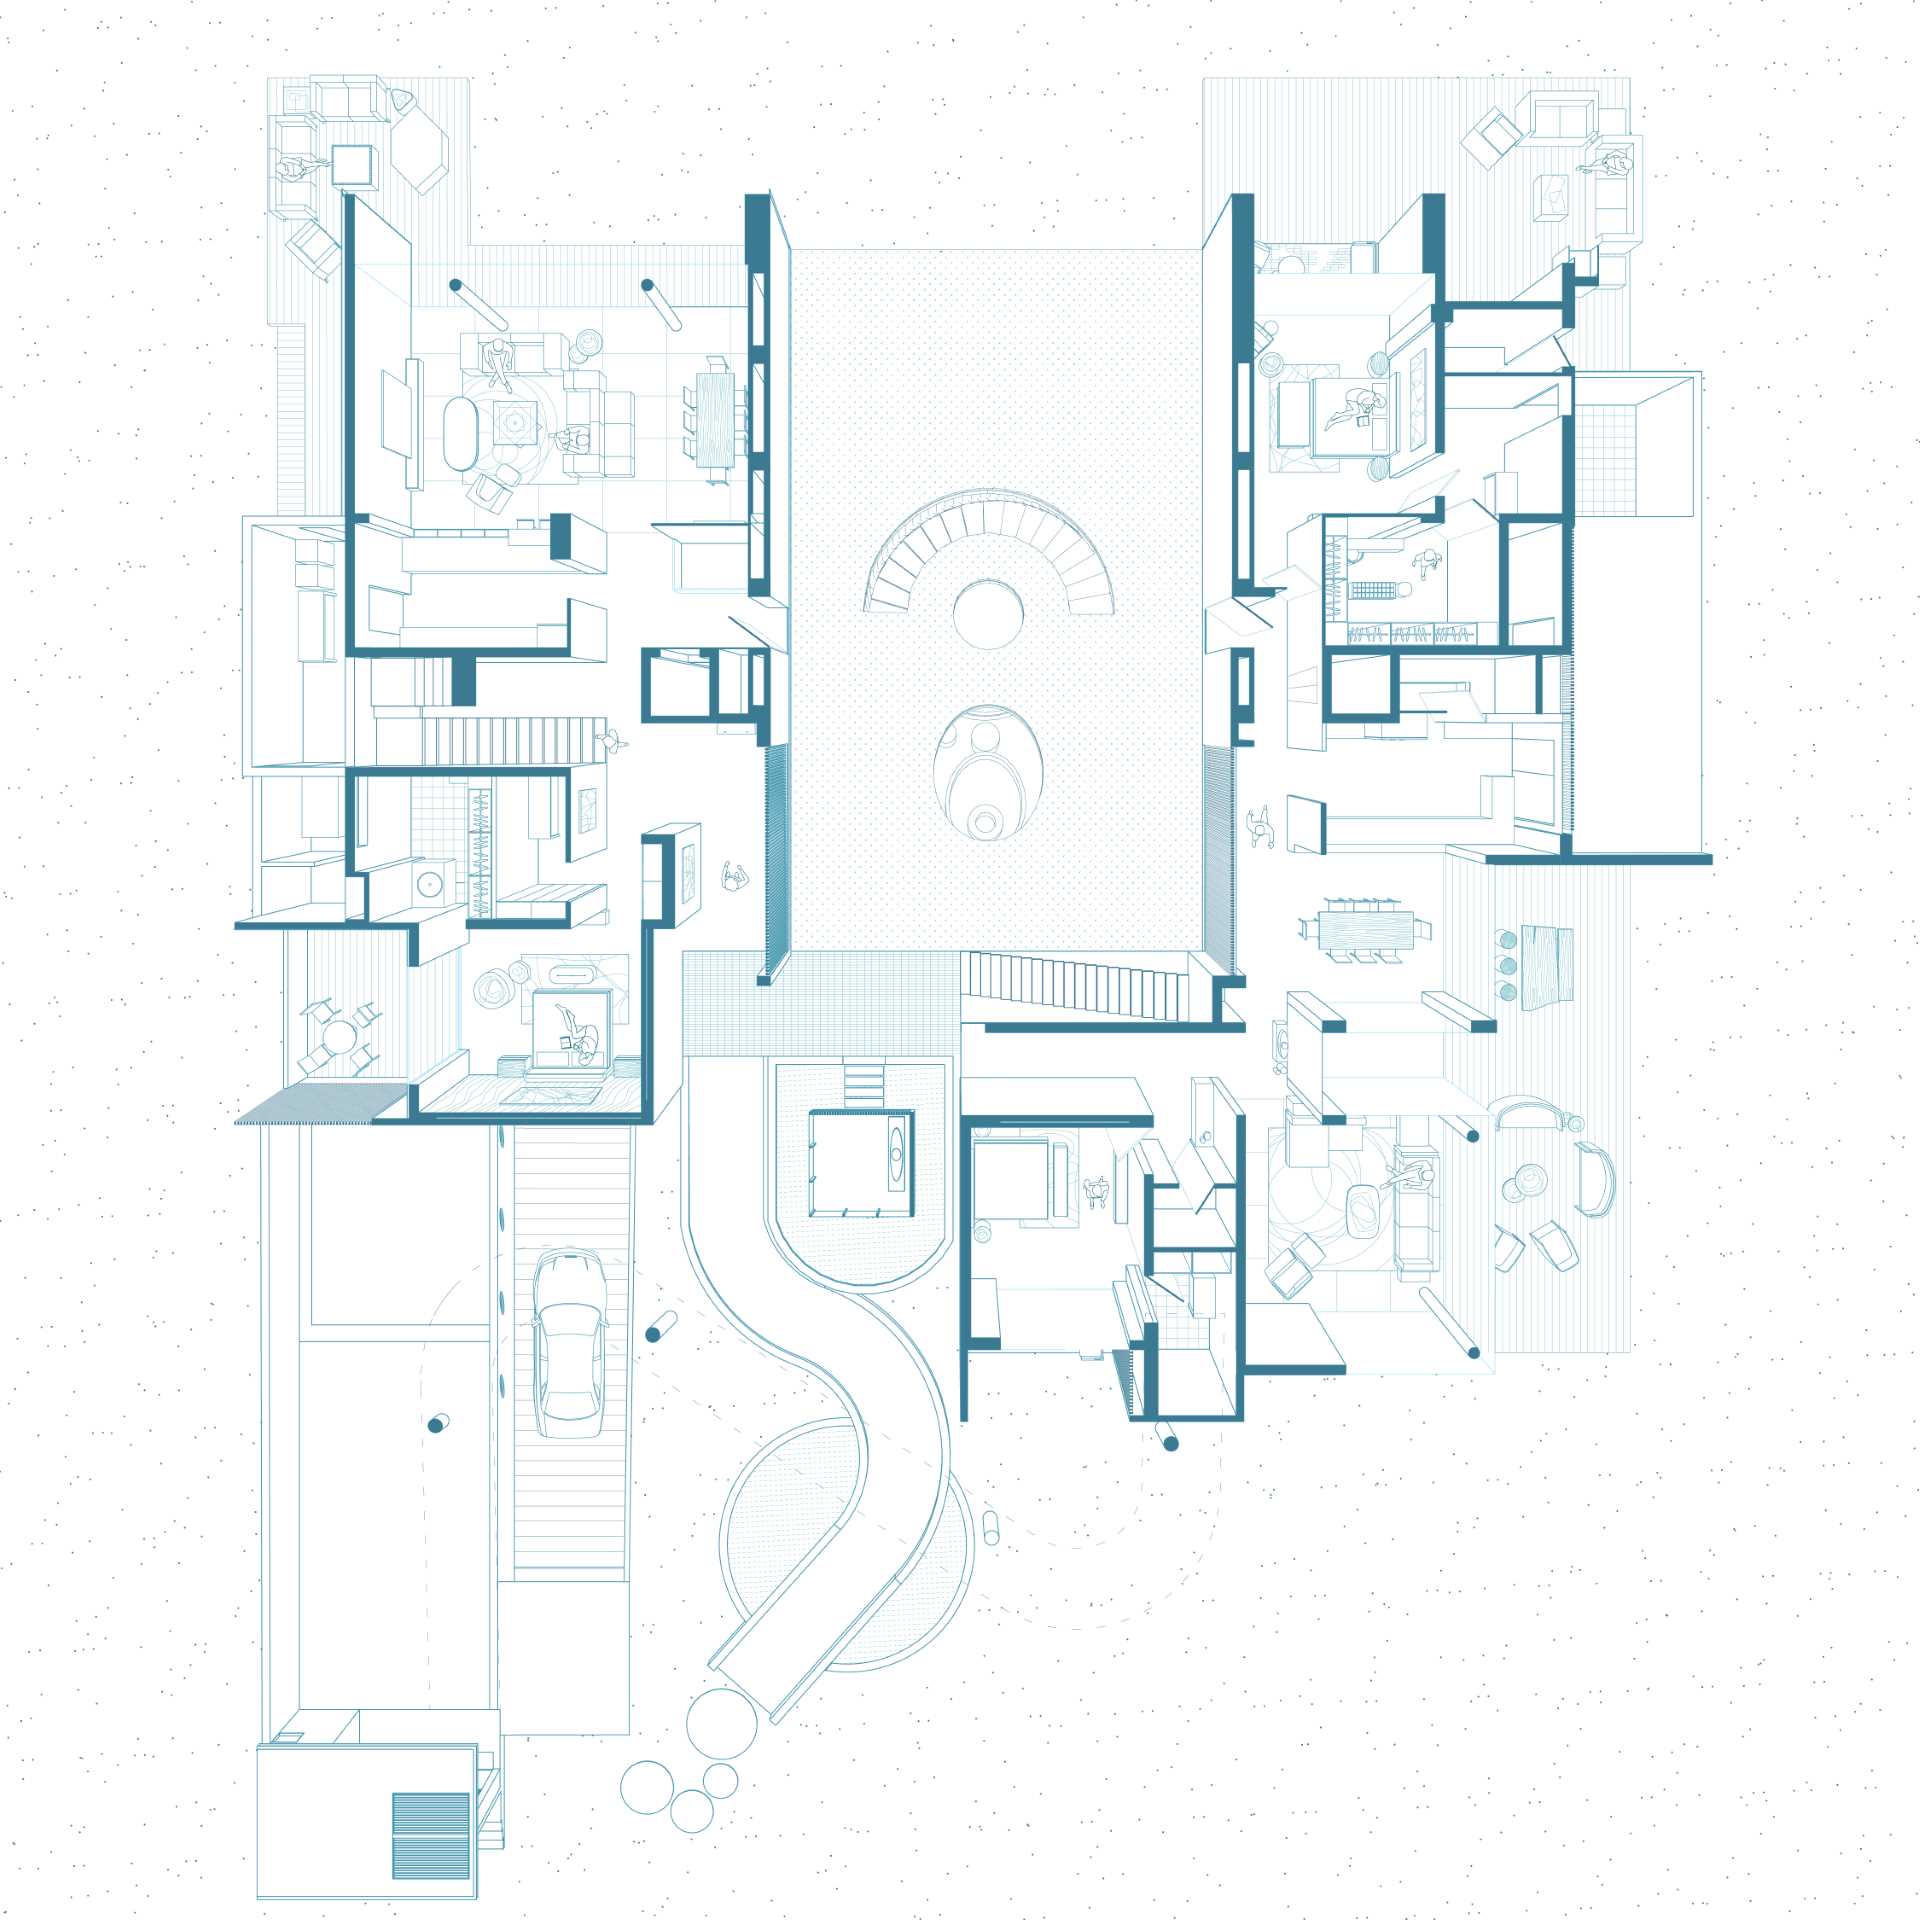 The floor plan of a modern home designed for different generations.